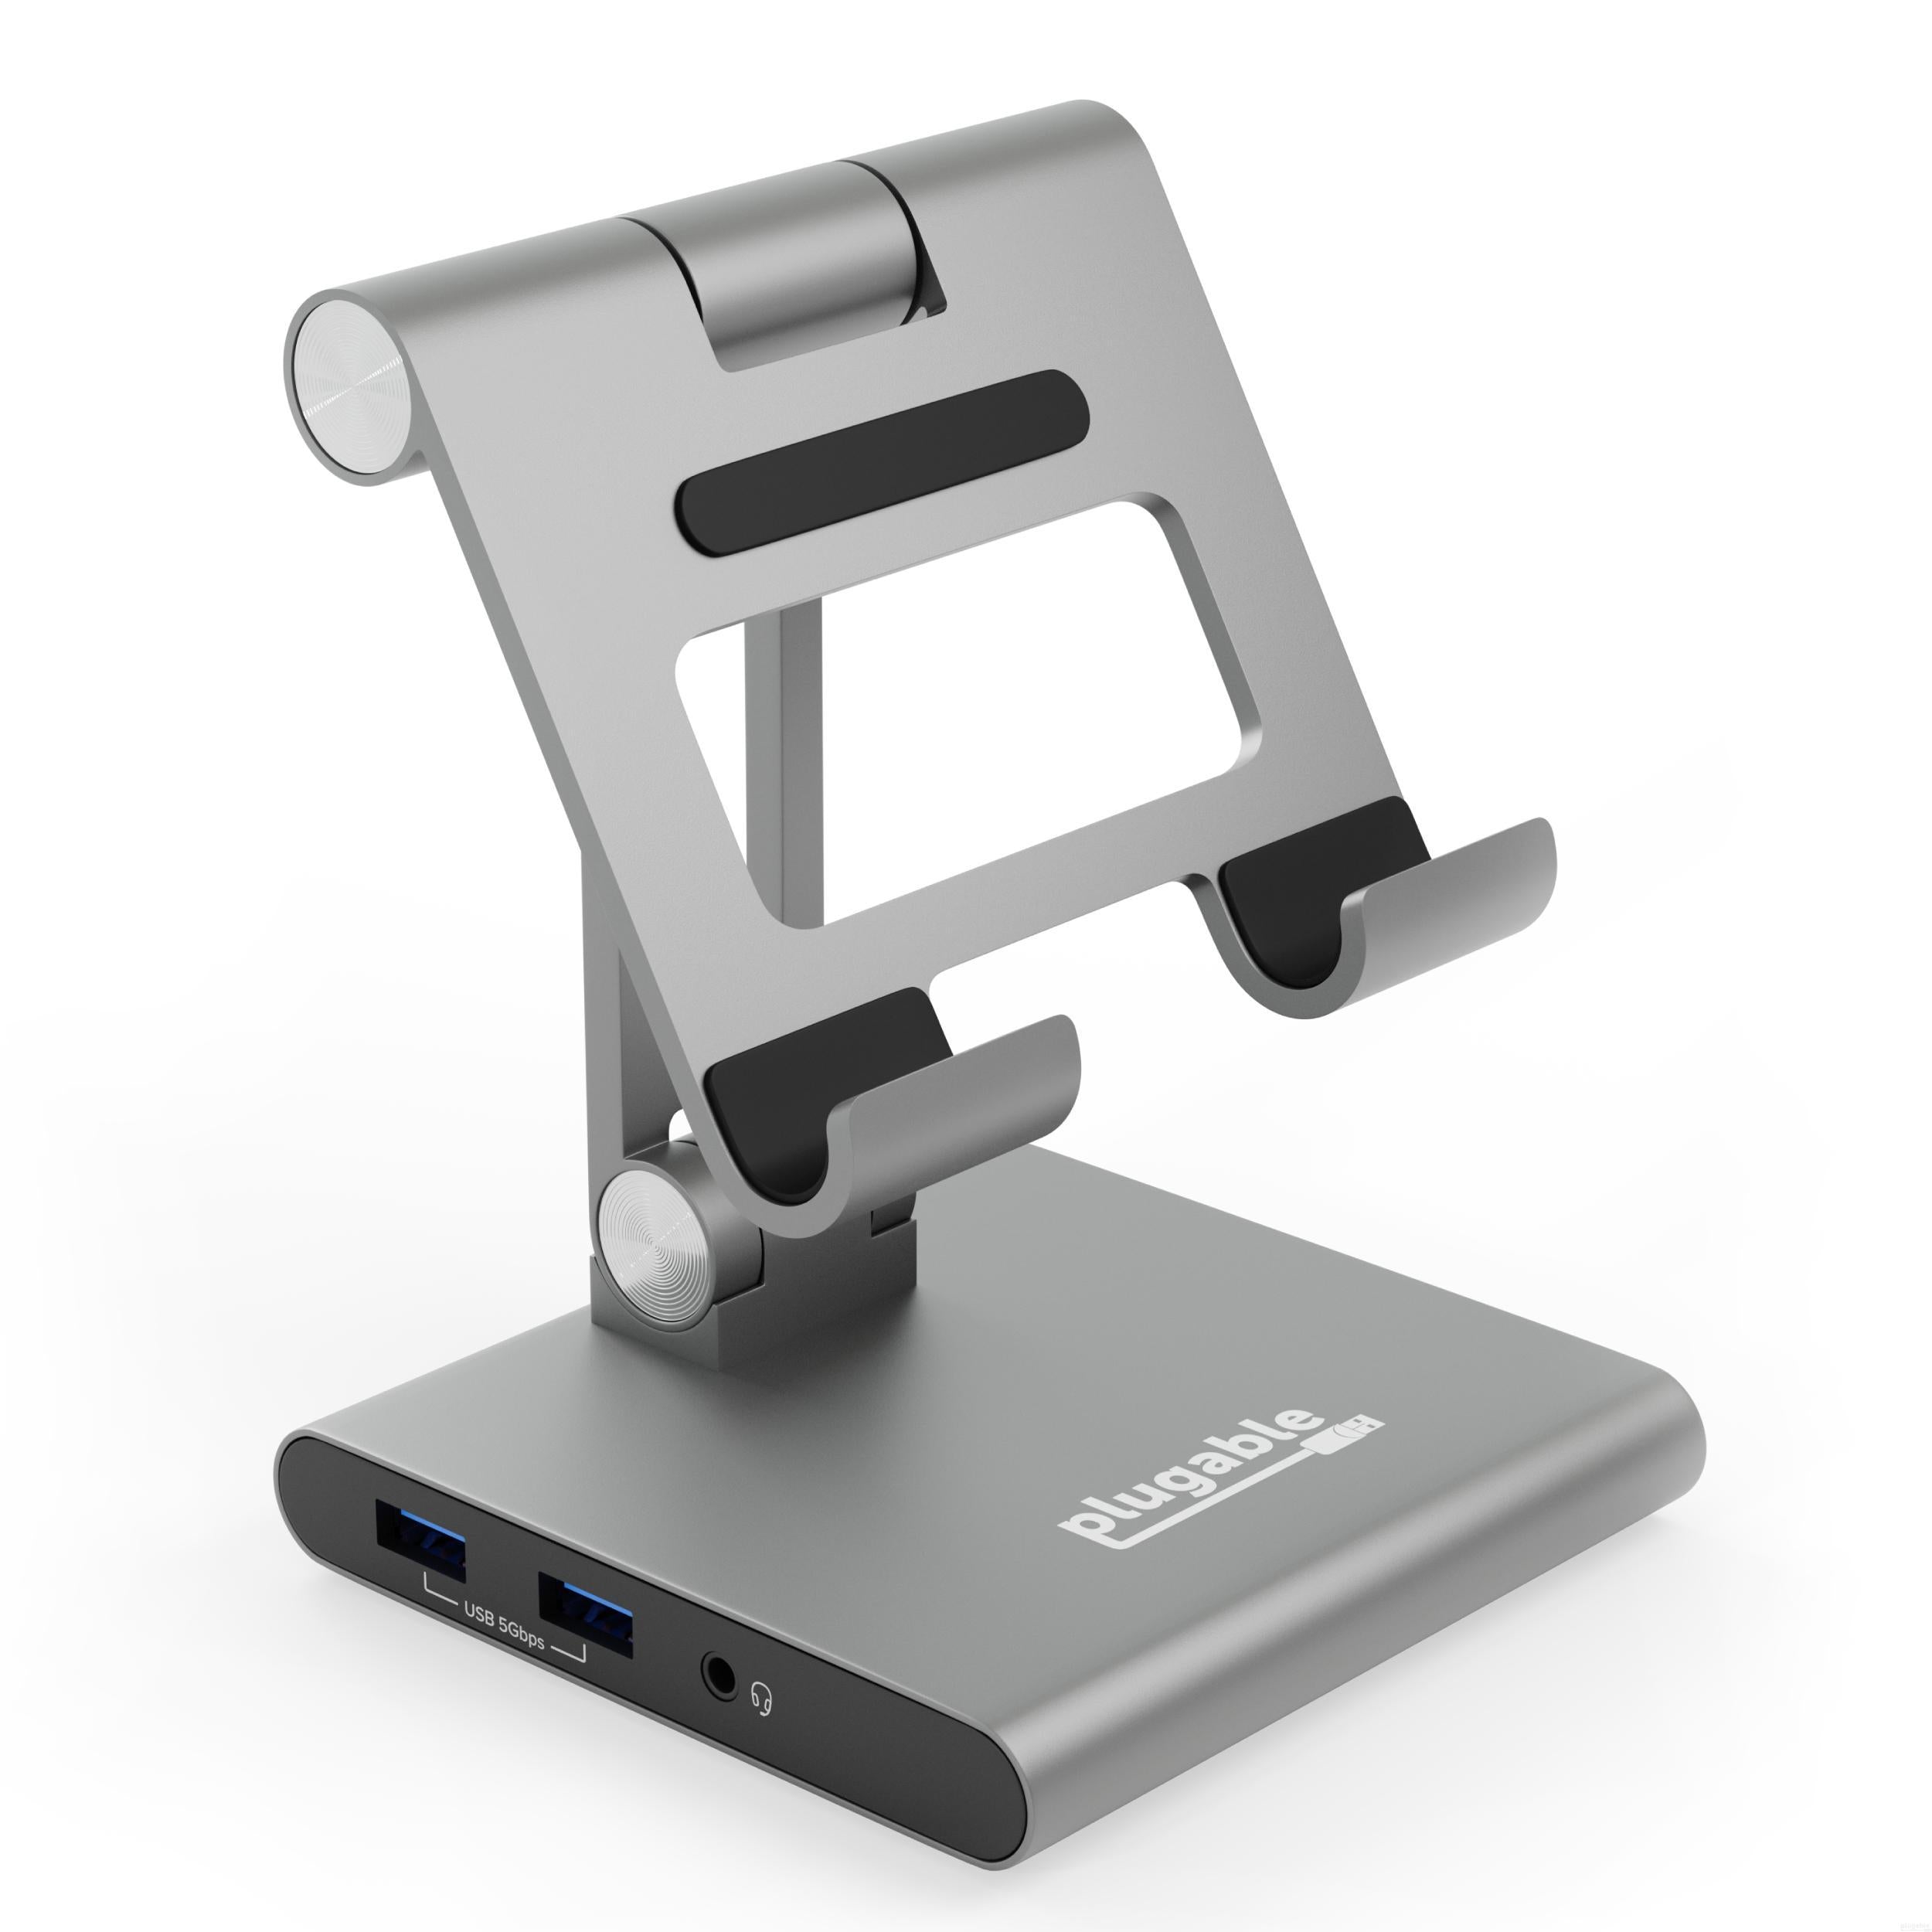 Plugable Digital Microscope with Flexible Arm Observation Stand Compatible  with USB and USB-C Windows, macOS, ChromeOS, iPad (USB C), Android, Linux